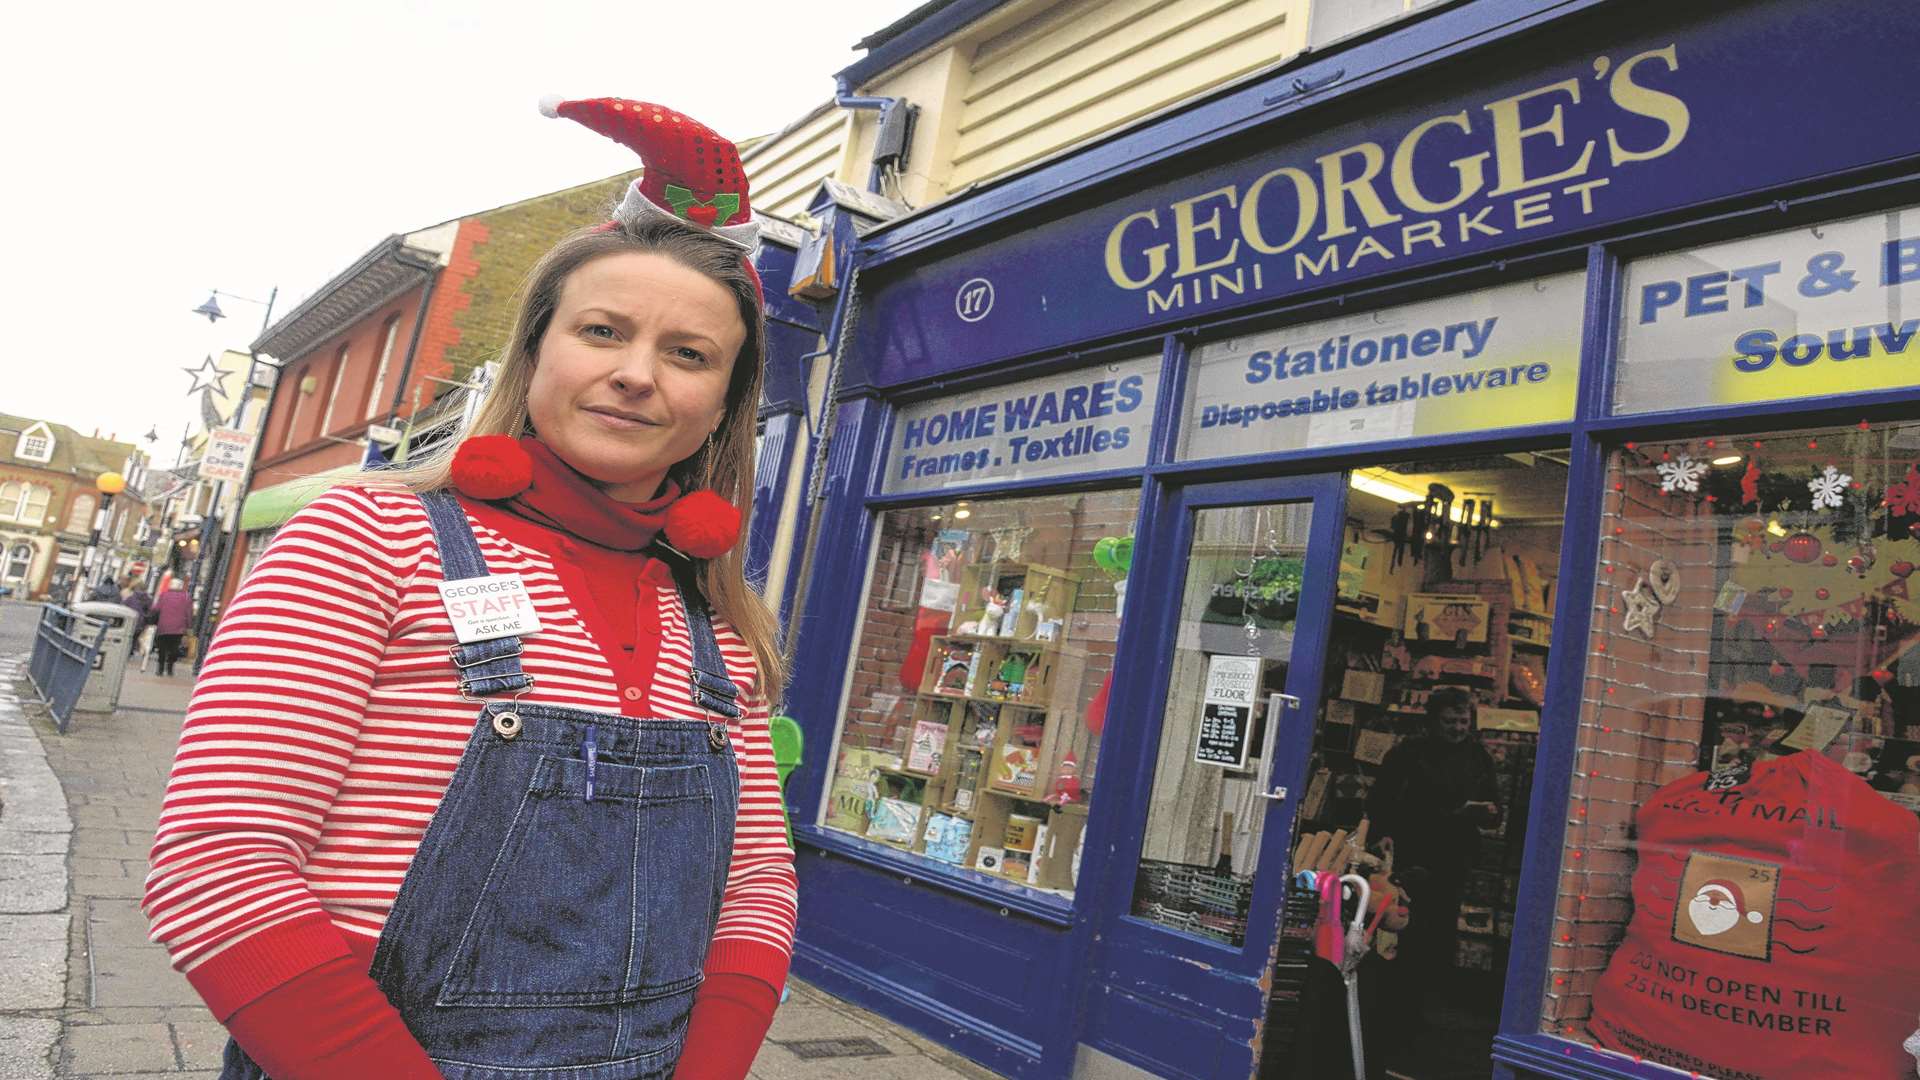 Lucy Eason at George's Mini Market in High Street, Whitstable